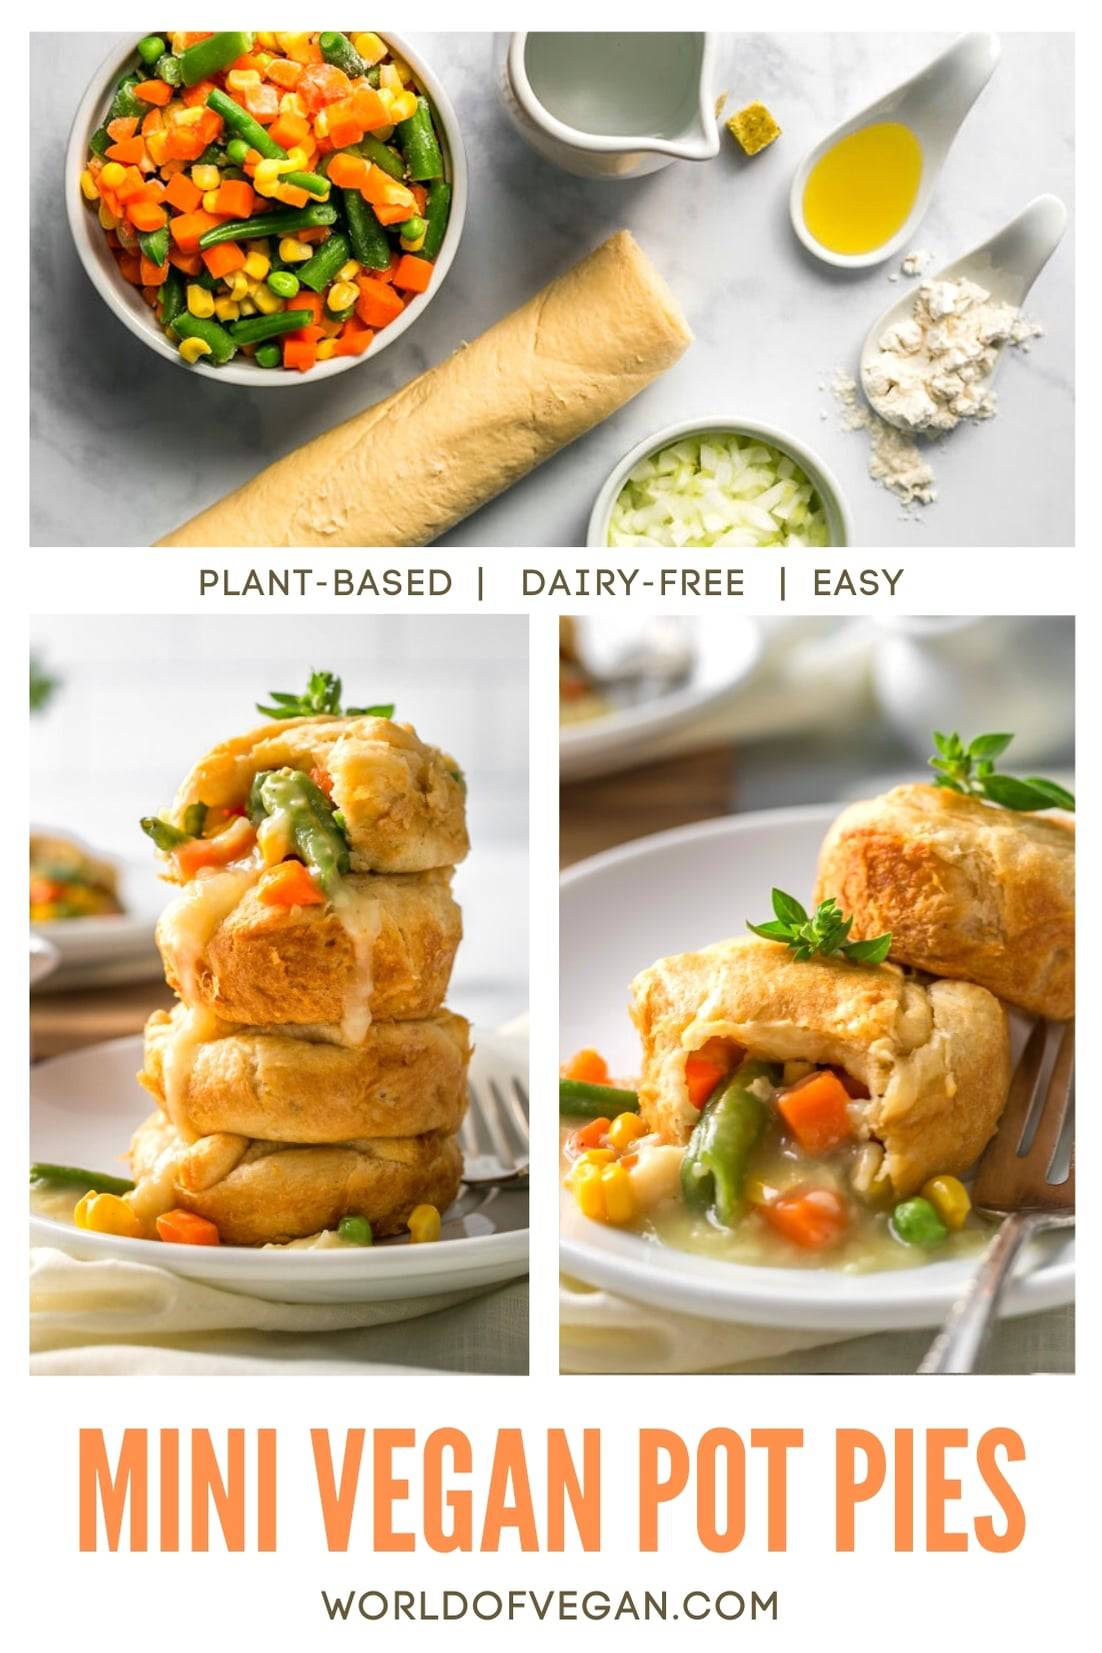 How to Make Vegan Pot Pie Step by Step Photos of Ingredients and Plated Pot Pies With Filling Spilling Out